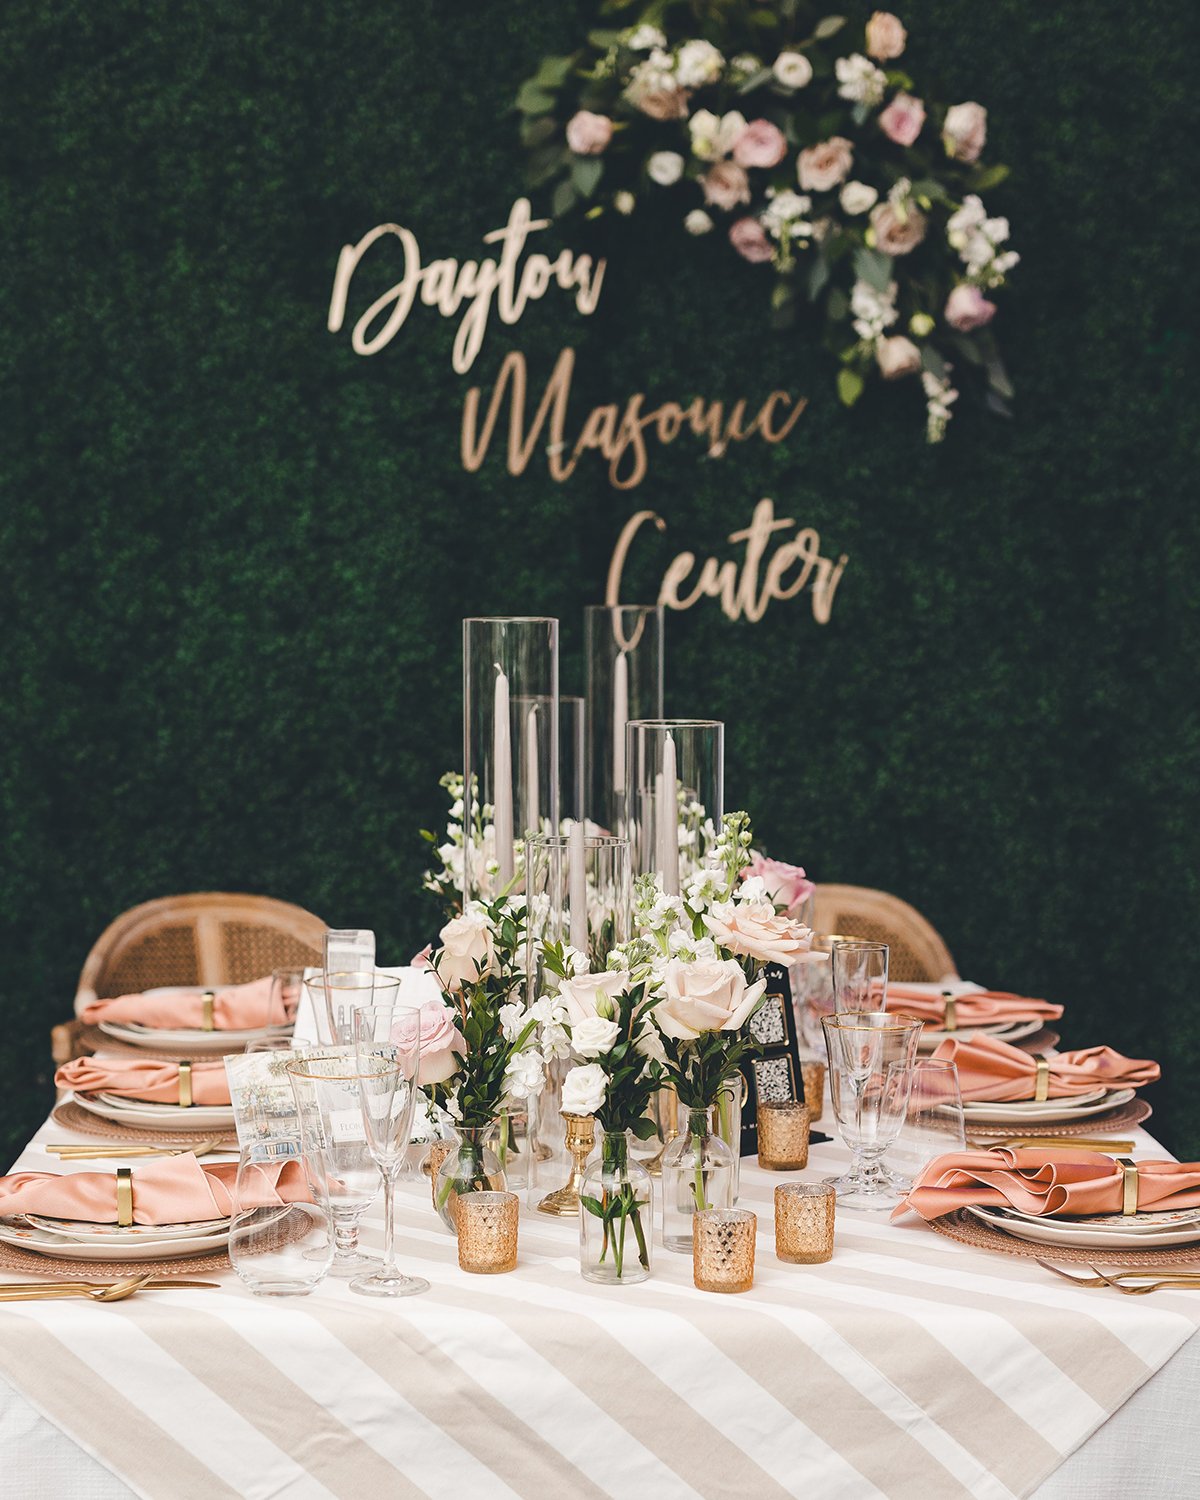 Did we see you at the Prime Time Party Rental Wedding Open House this March?

We had so much fun meeting so many people and also being able to design booths for several of the other vendors!  How delightful was this tablescape for Dayton Masonic Cent